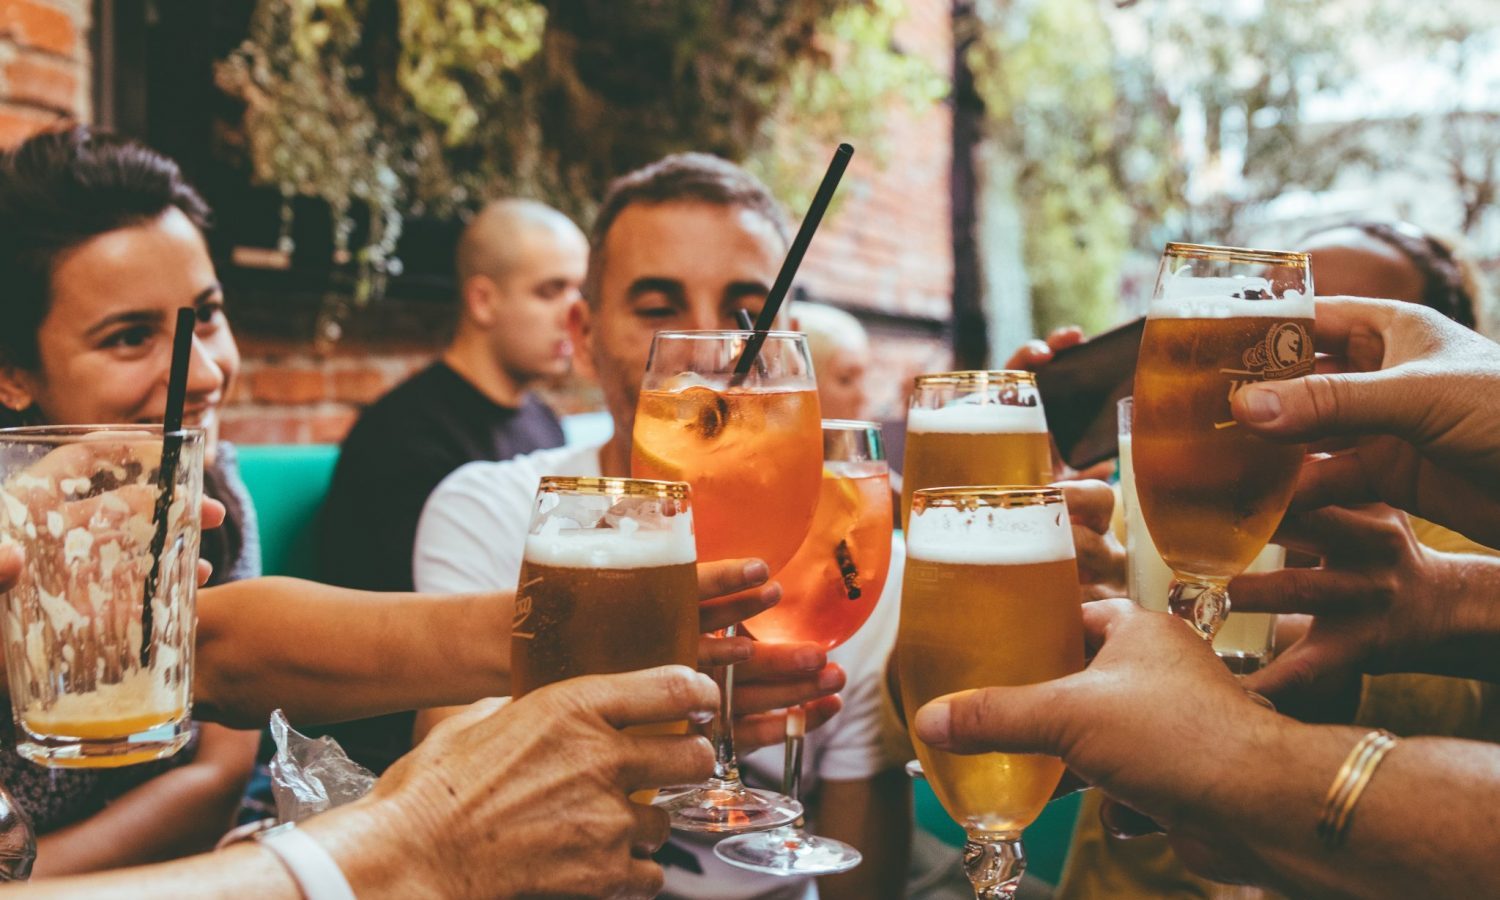 Has The Pandemic Changed Your Drinking Habits? Here's How To Know